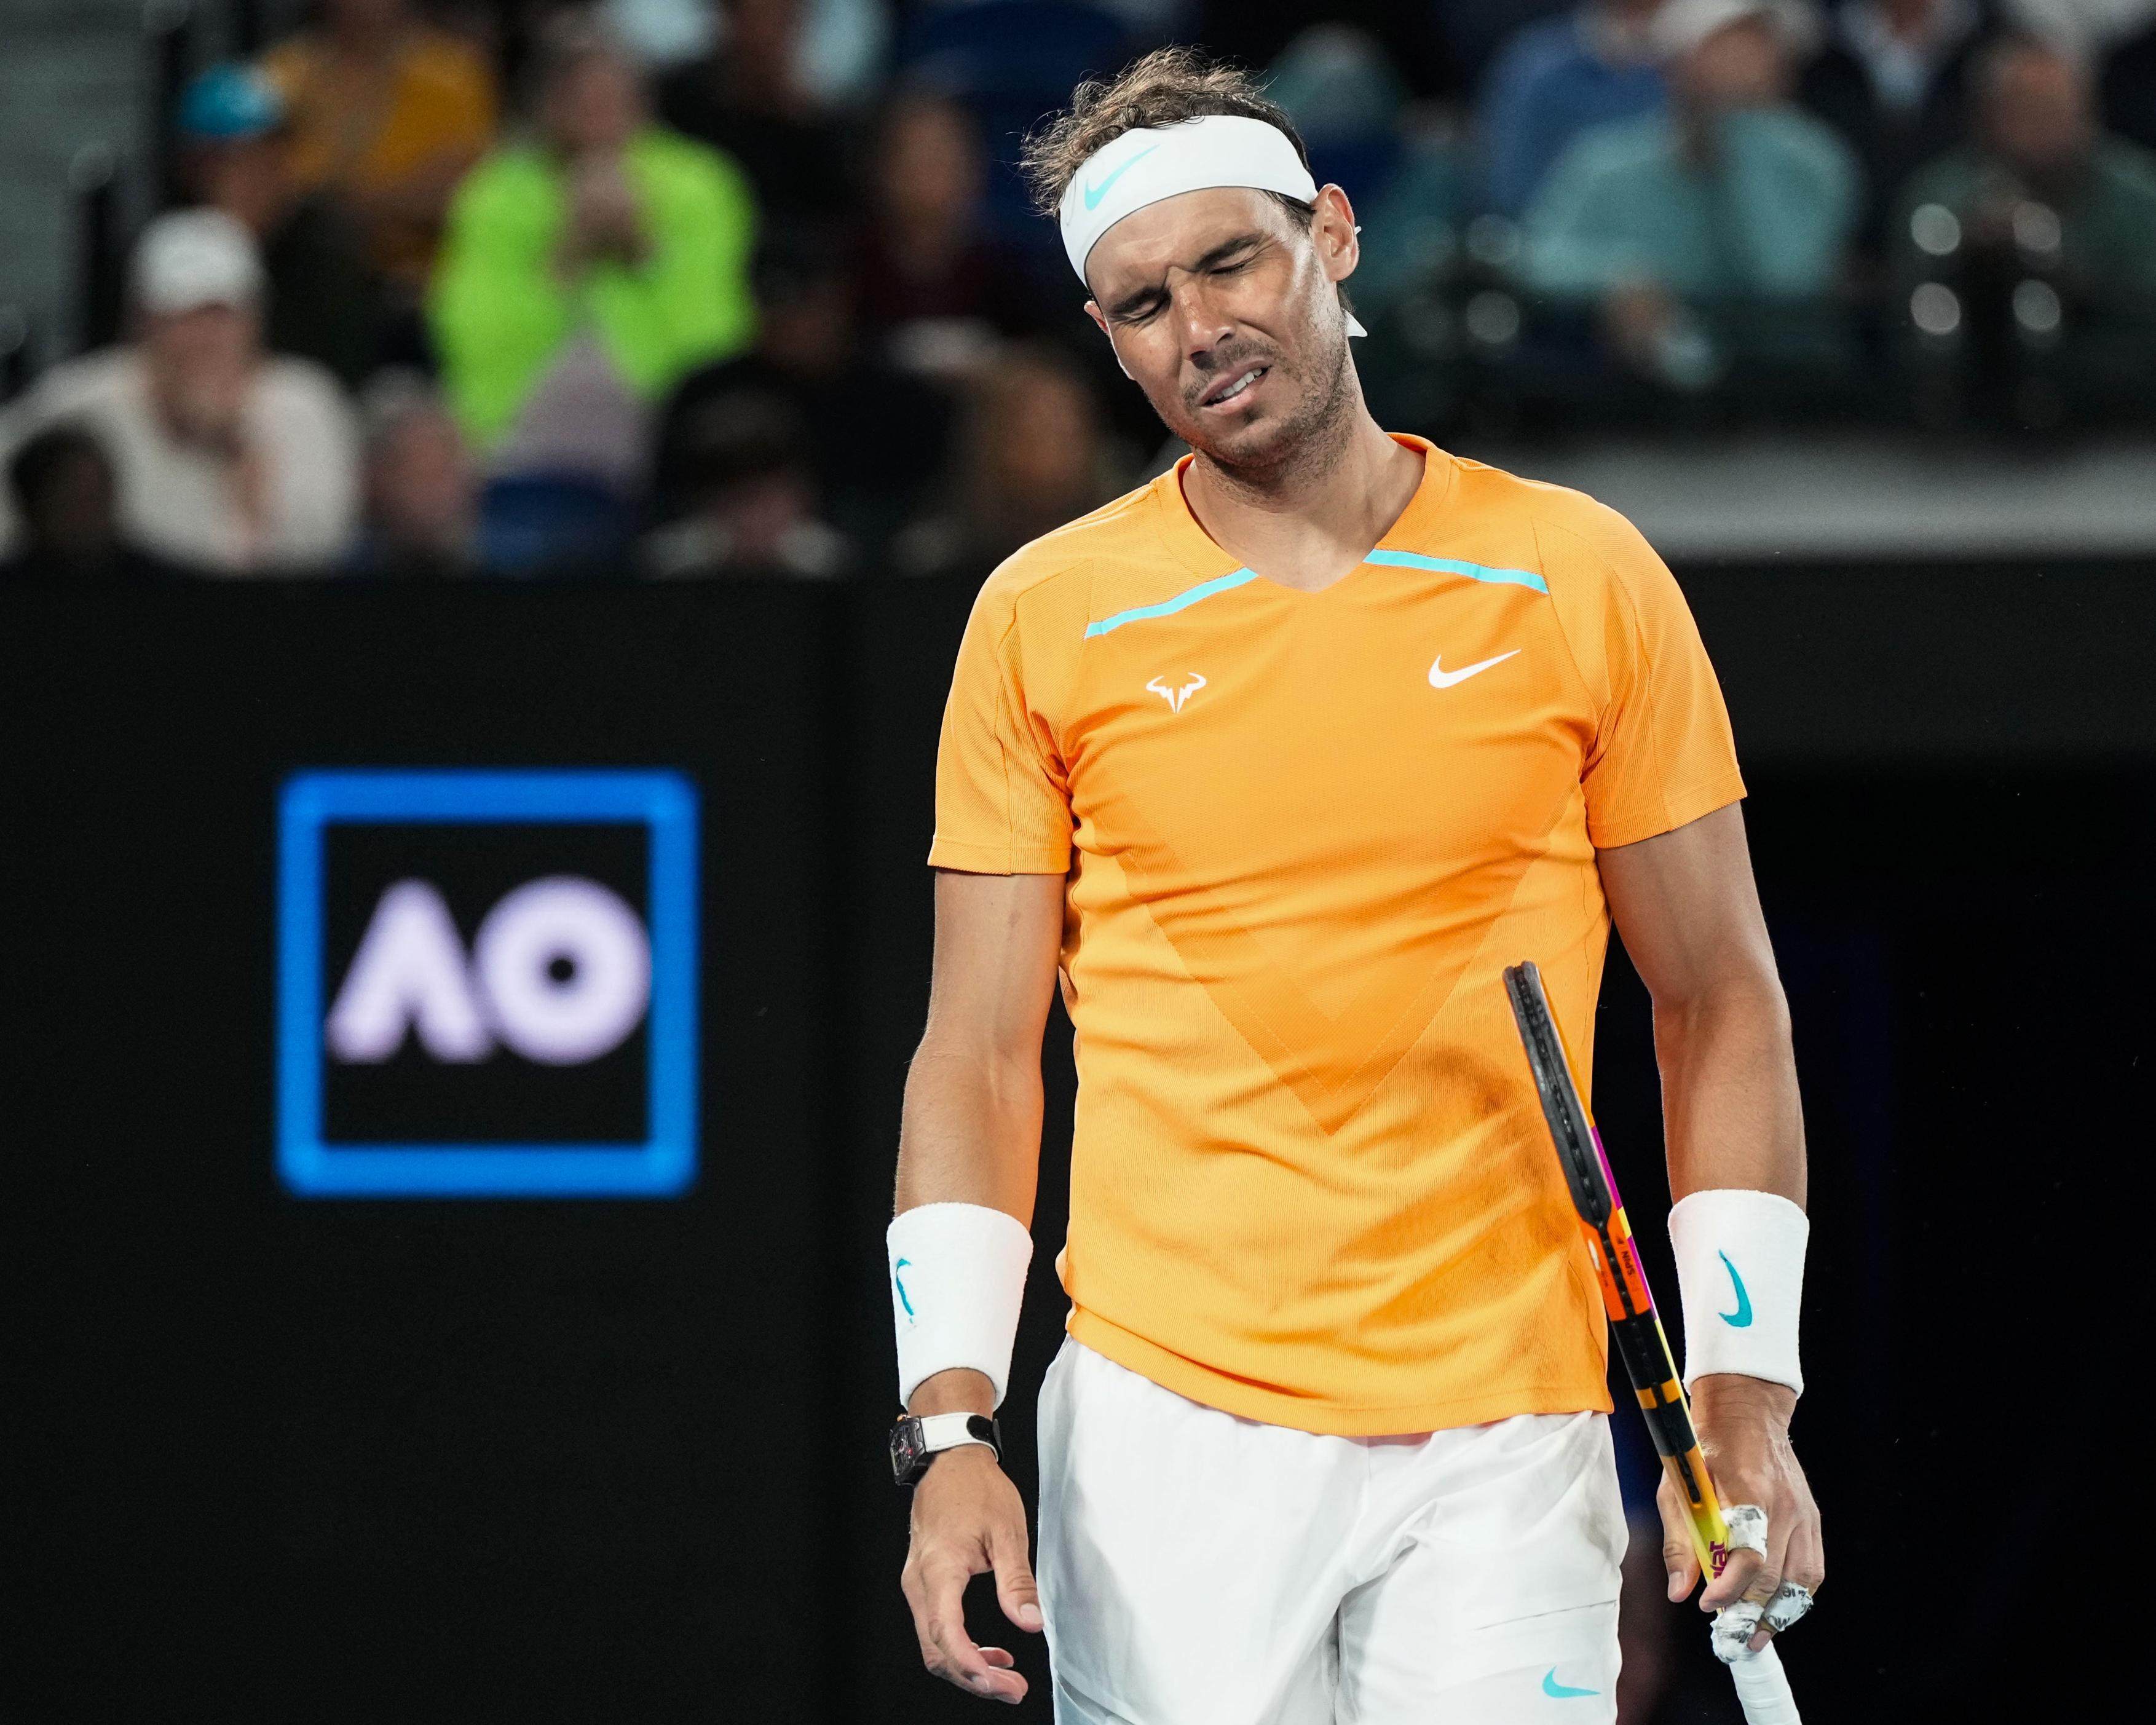 Rafael Nadal reacts after losing a point to Mackenzie McDonald of the United States in the second round of the men’s singles at the Australian Open. Photo: Kyodo